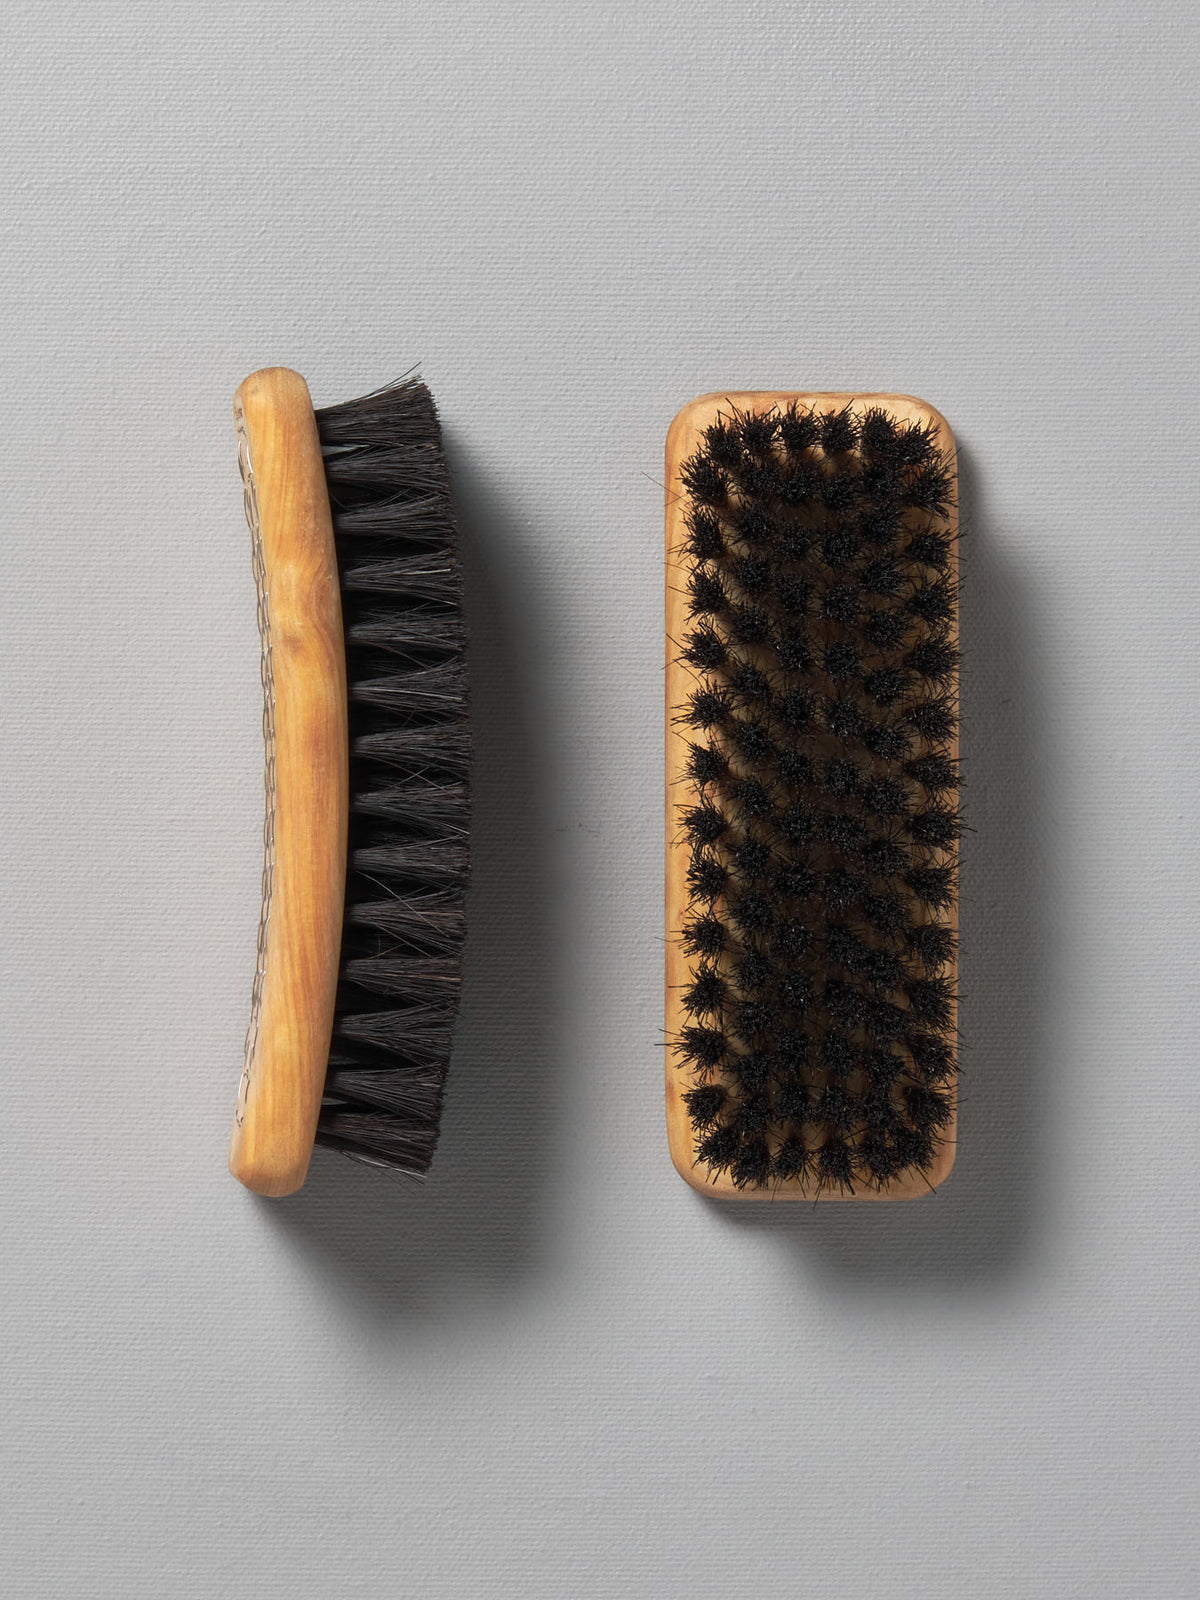 Two Iris Hantverk shoe brushes on top of each other on a grey surface.